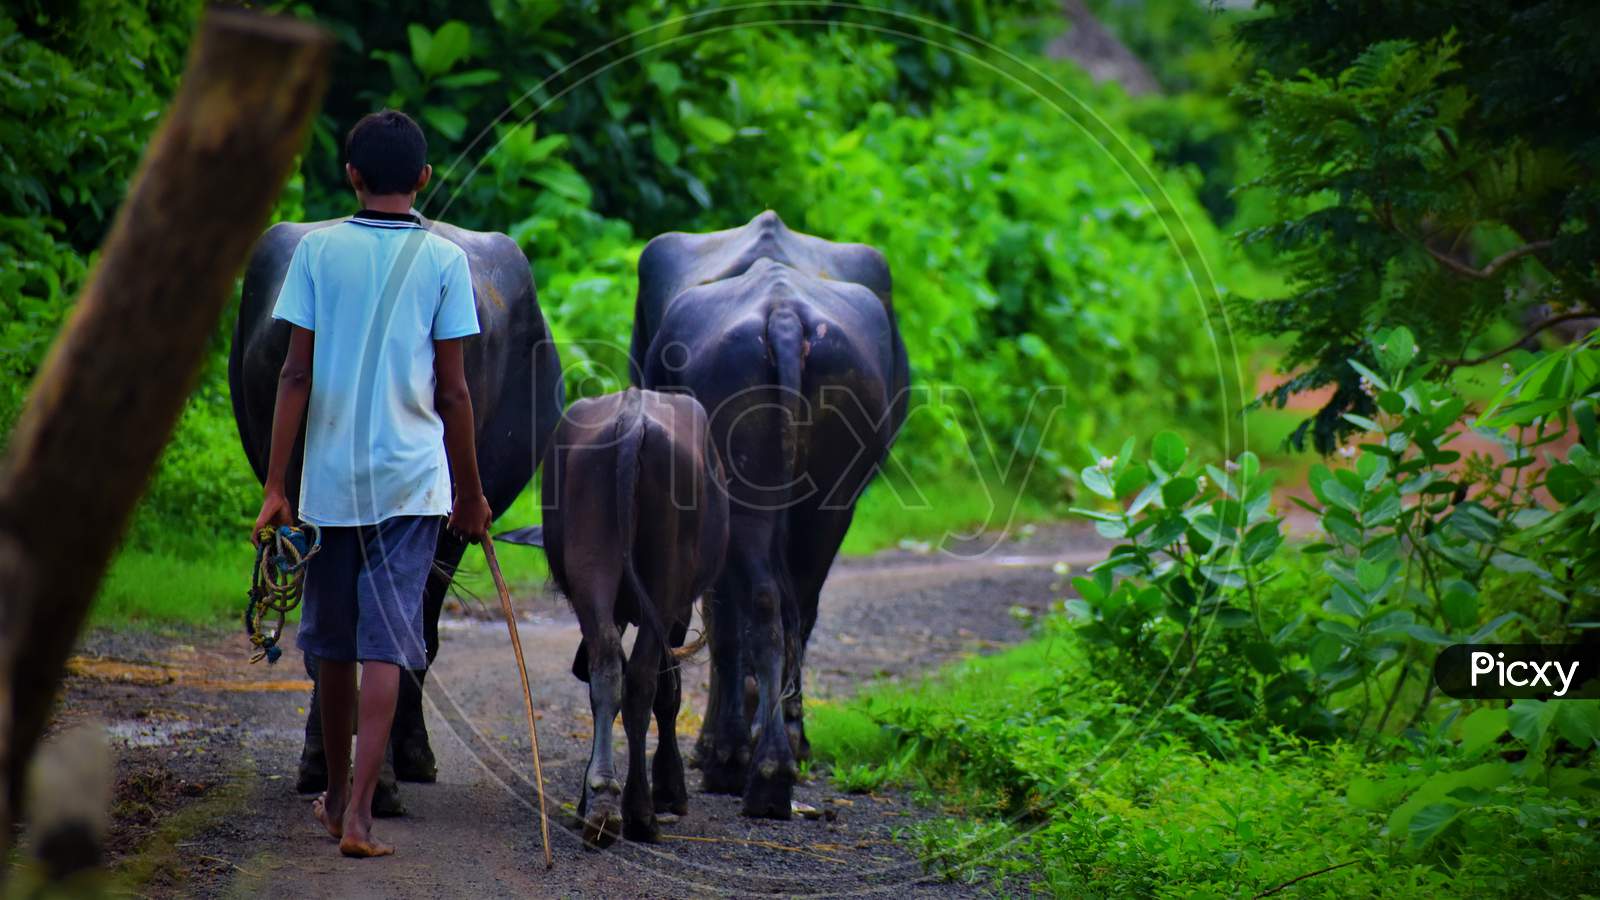 Village boy going to nearby lake with his buffaloes in search of water